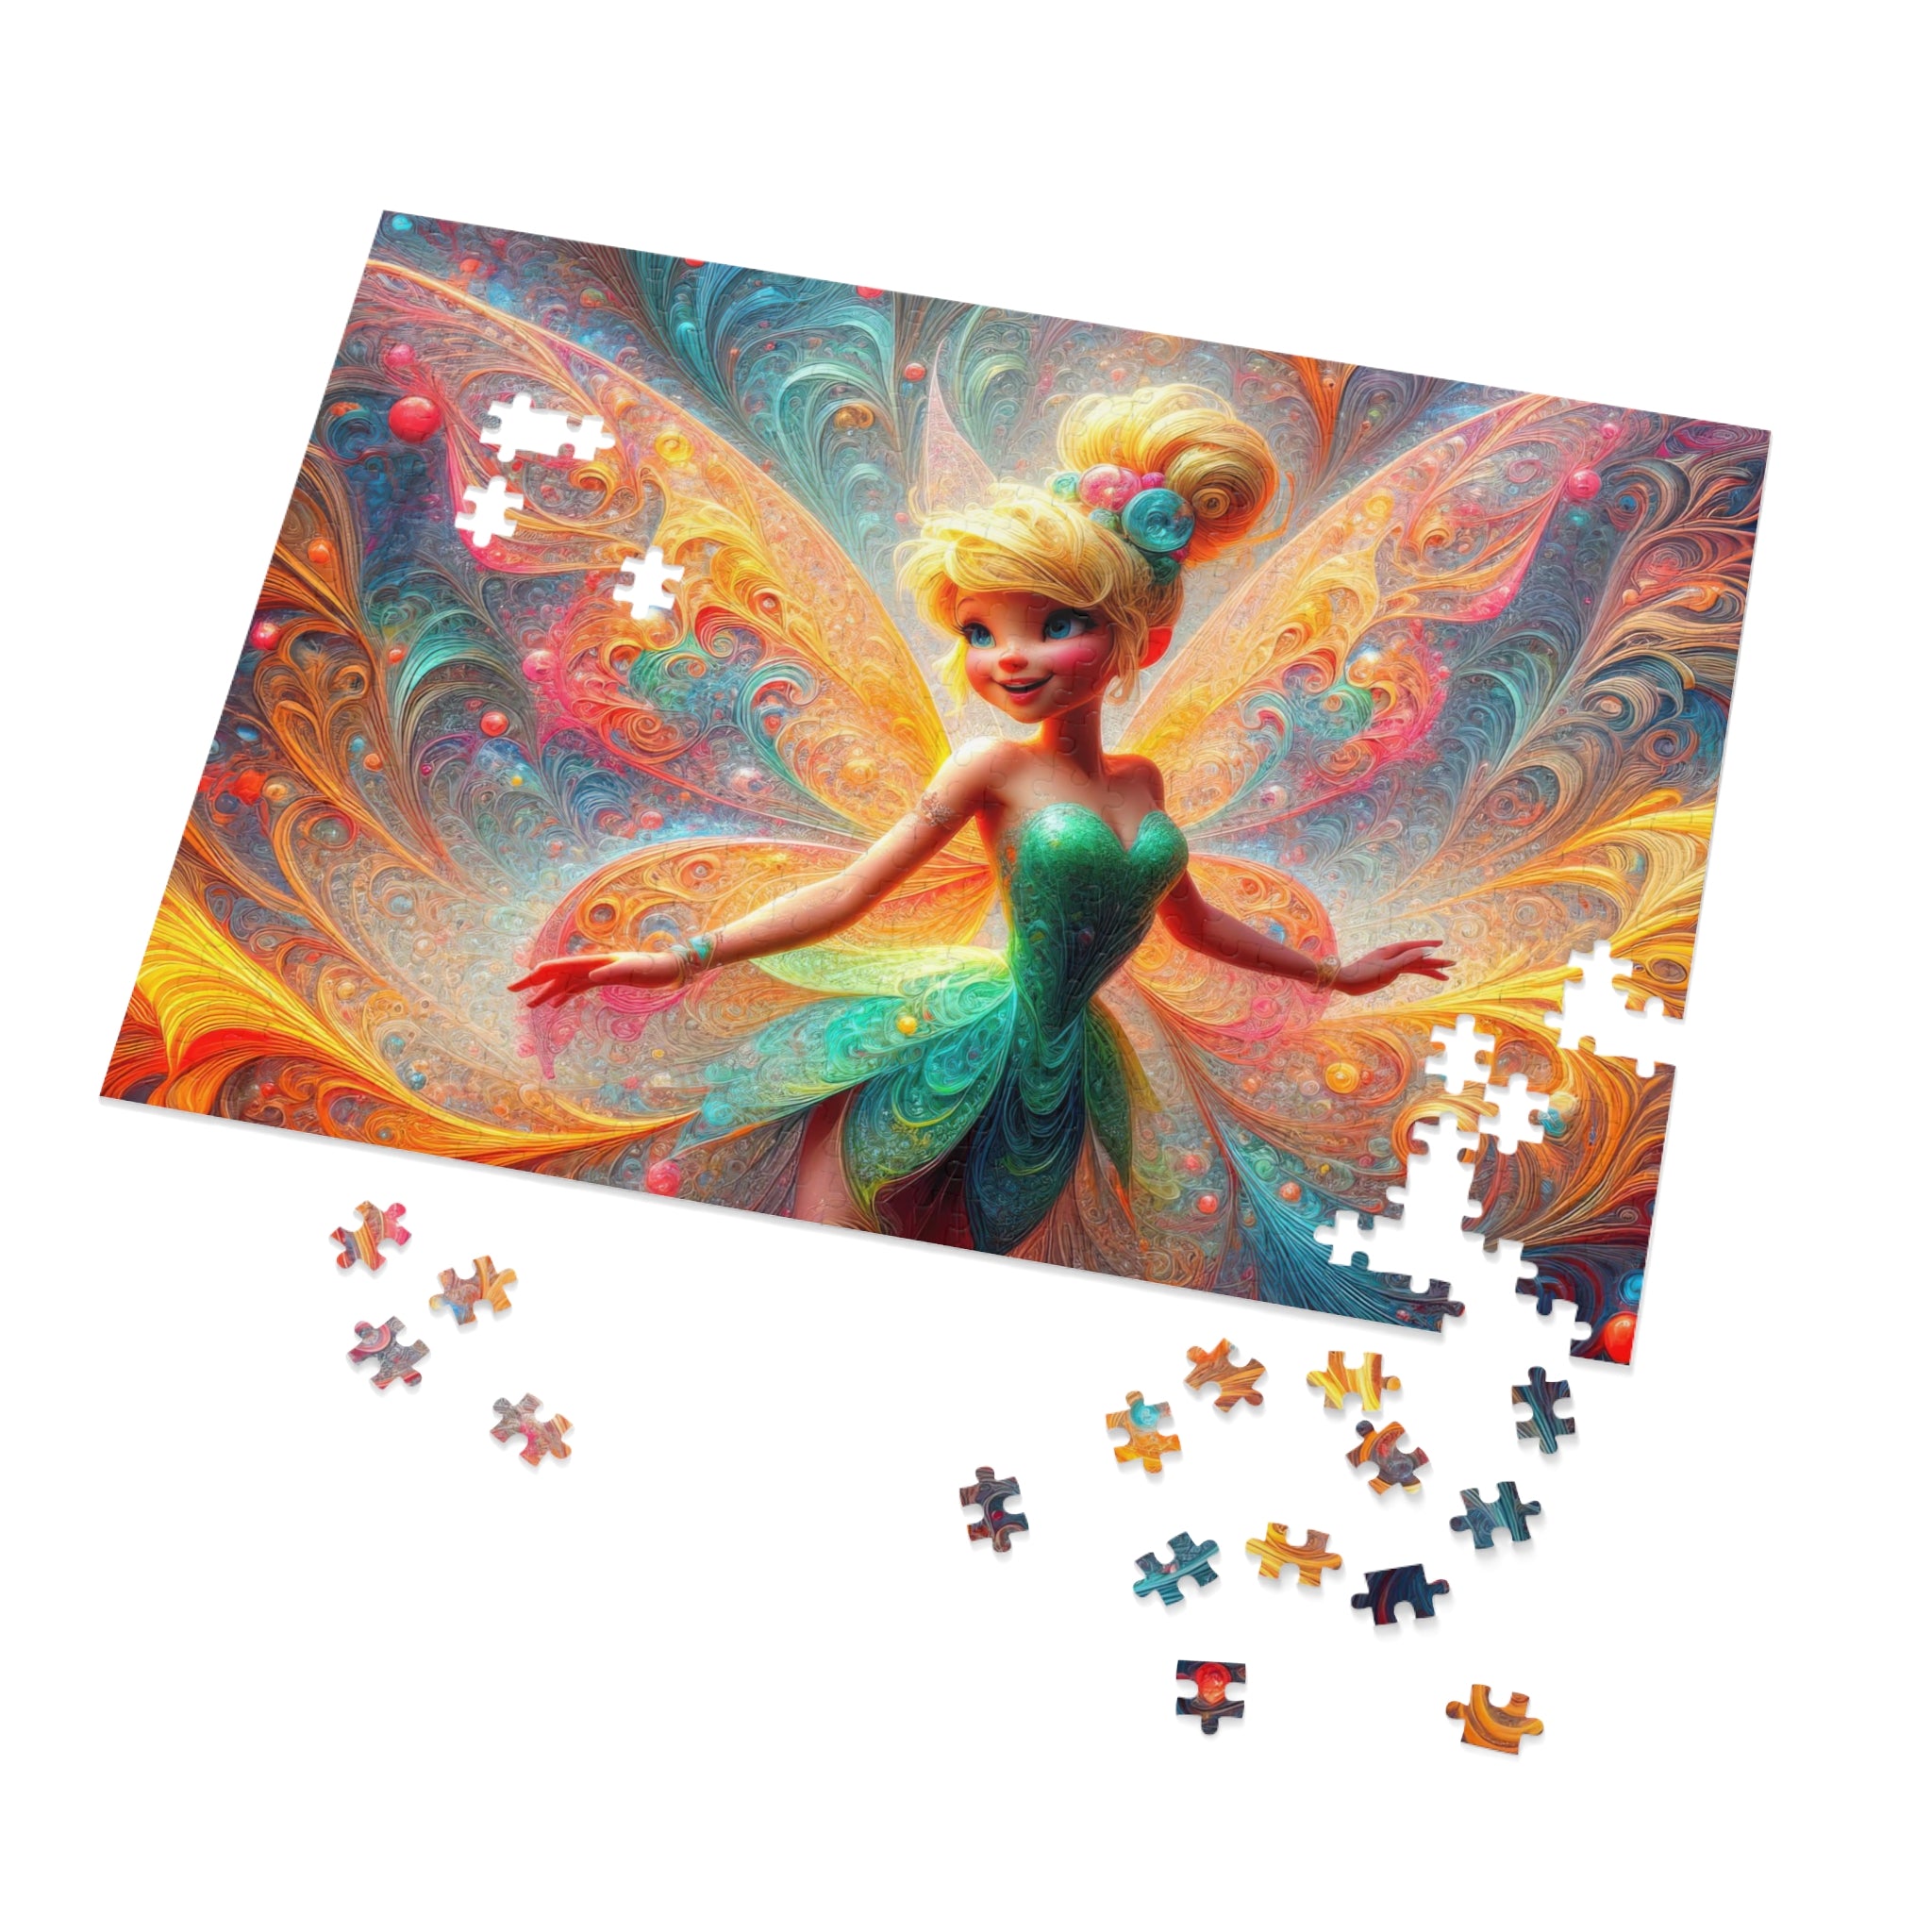 Dance of the Sunlit Fairy Jigsaw Puzzle